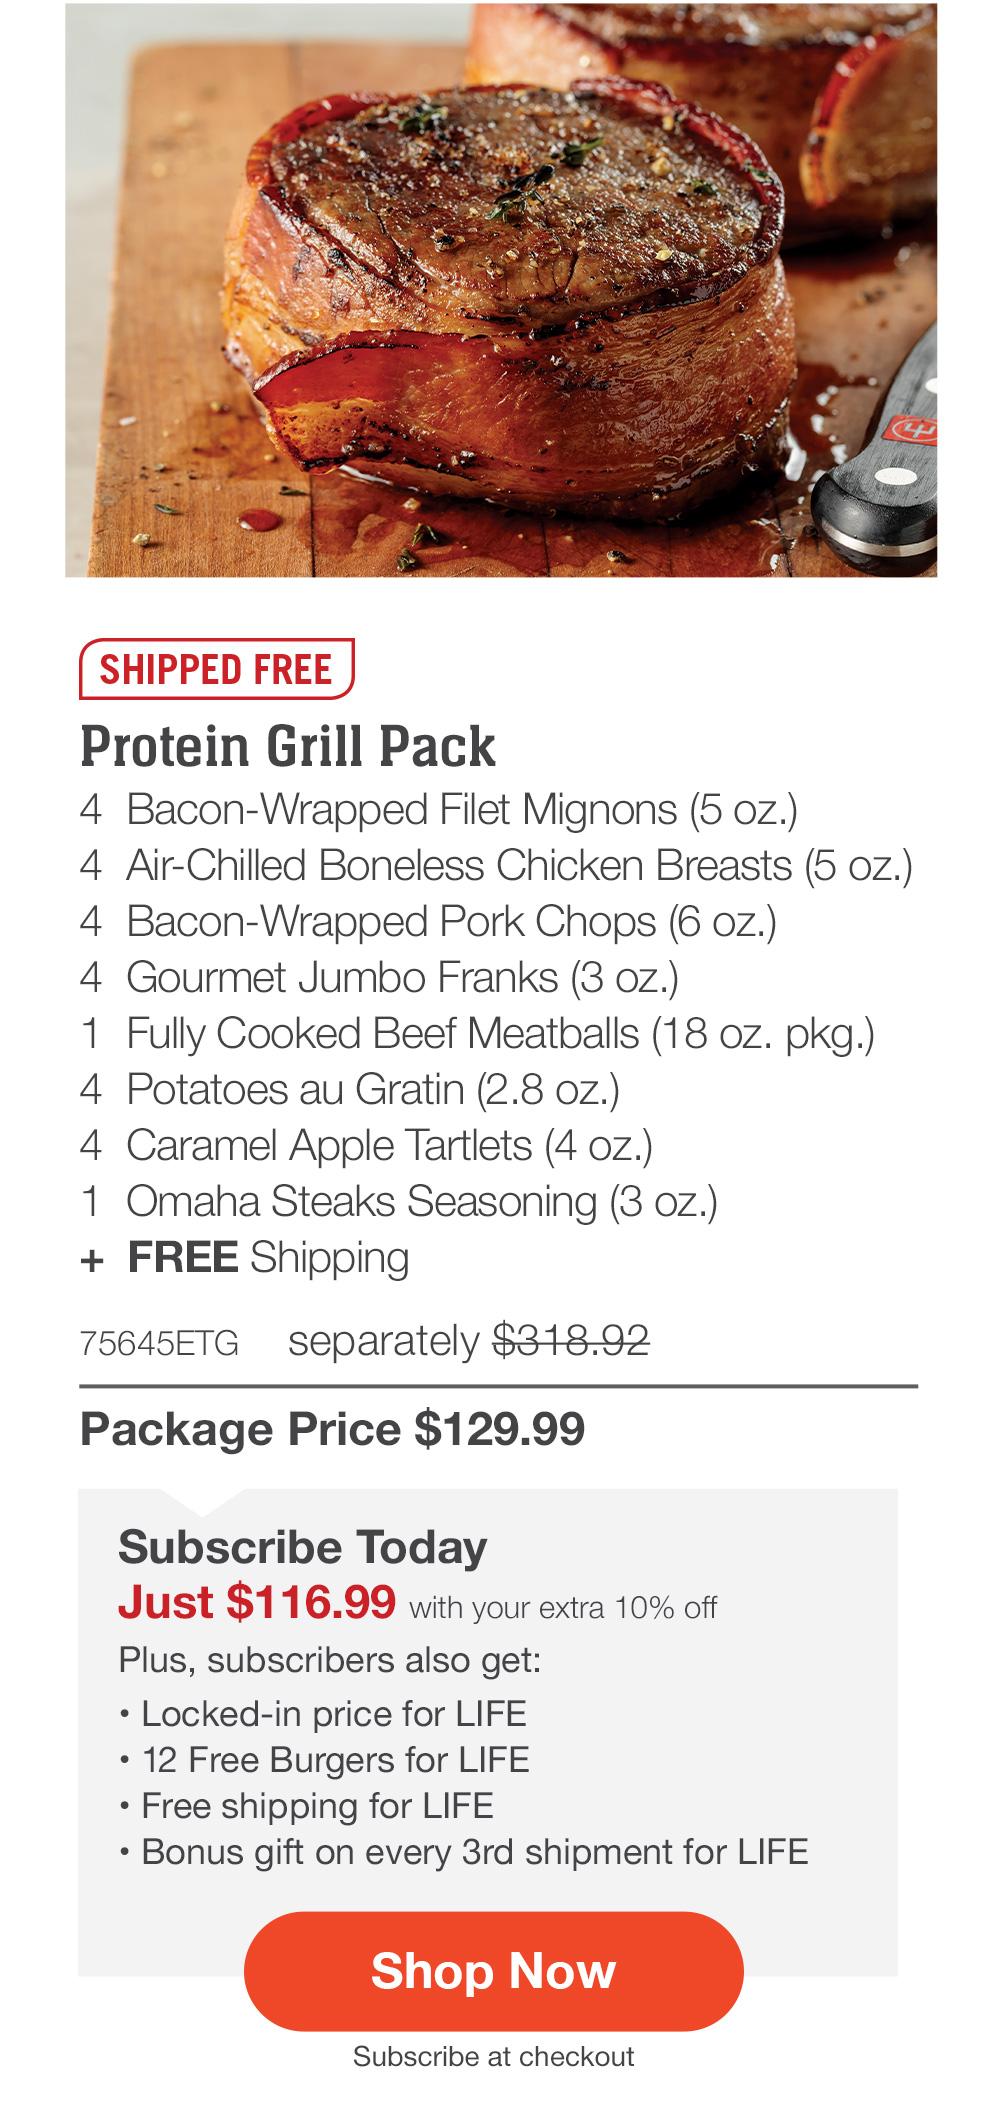 Protein Grill Pack - 4 Bacon-Wrapped Filet Mignons (5 oz.) - 4 Air-Chilled Boneless Chicken Breasts (5 oz.) - 4 Bacon-Wrapped Pork Chops (6 oz.) - 4 Gourmet Jumbo Franks (3 oz.) - 1 Fully Cooked Beef Meatballs (18 oz. pkg.) - 4 Potatoes au Gratin (2.8 oz.) - 4 Caramel Apple Tartlets (4 oz.) - 1 Omaha Steaks Seasoning (3 oz.) + FREE Shipping - 75645ETG separately $318.92 | Package Price $129.99 | Subscribe Today - Just $116.99 with your extra 10% off Plus, subscribers also get: Locked-in price for LIFE | 12 Free Burgers for LIFE | Free shipping for LIFE | Bonus gift on every 3rd shipment for LIFE || Shop Now || Subscribe at checkout